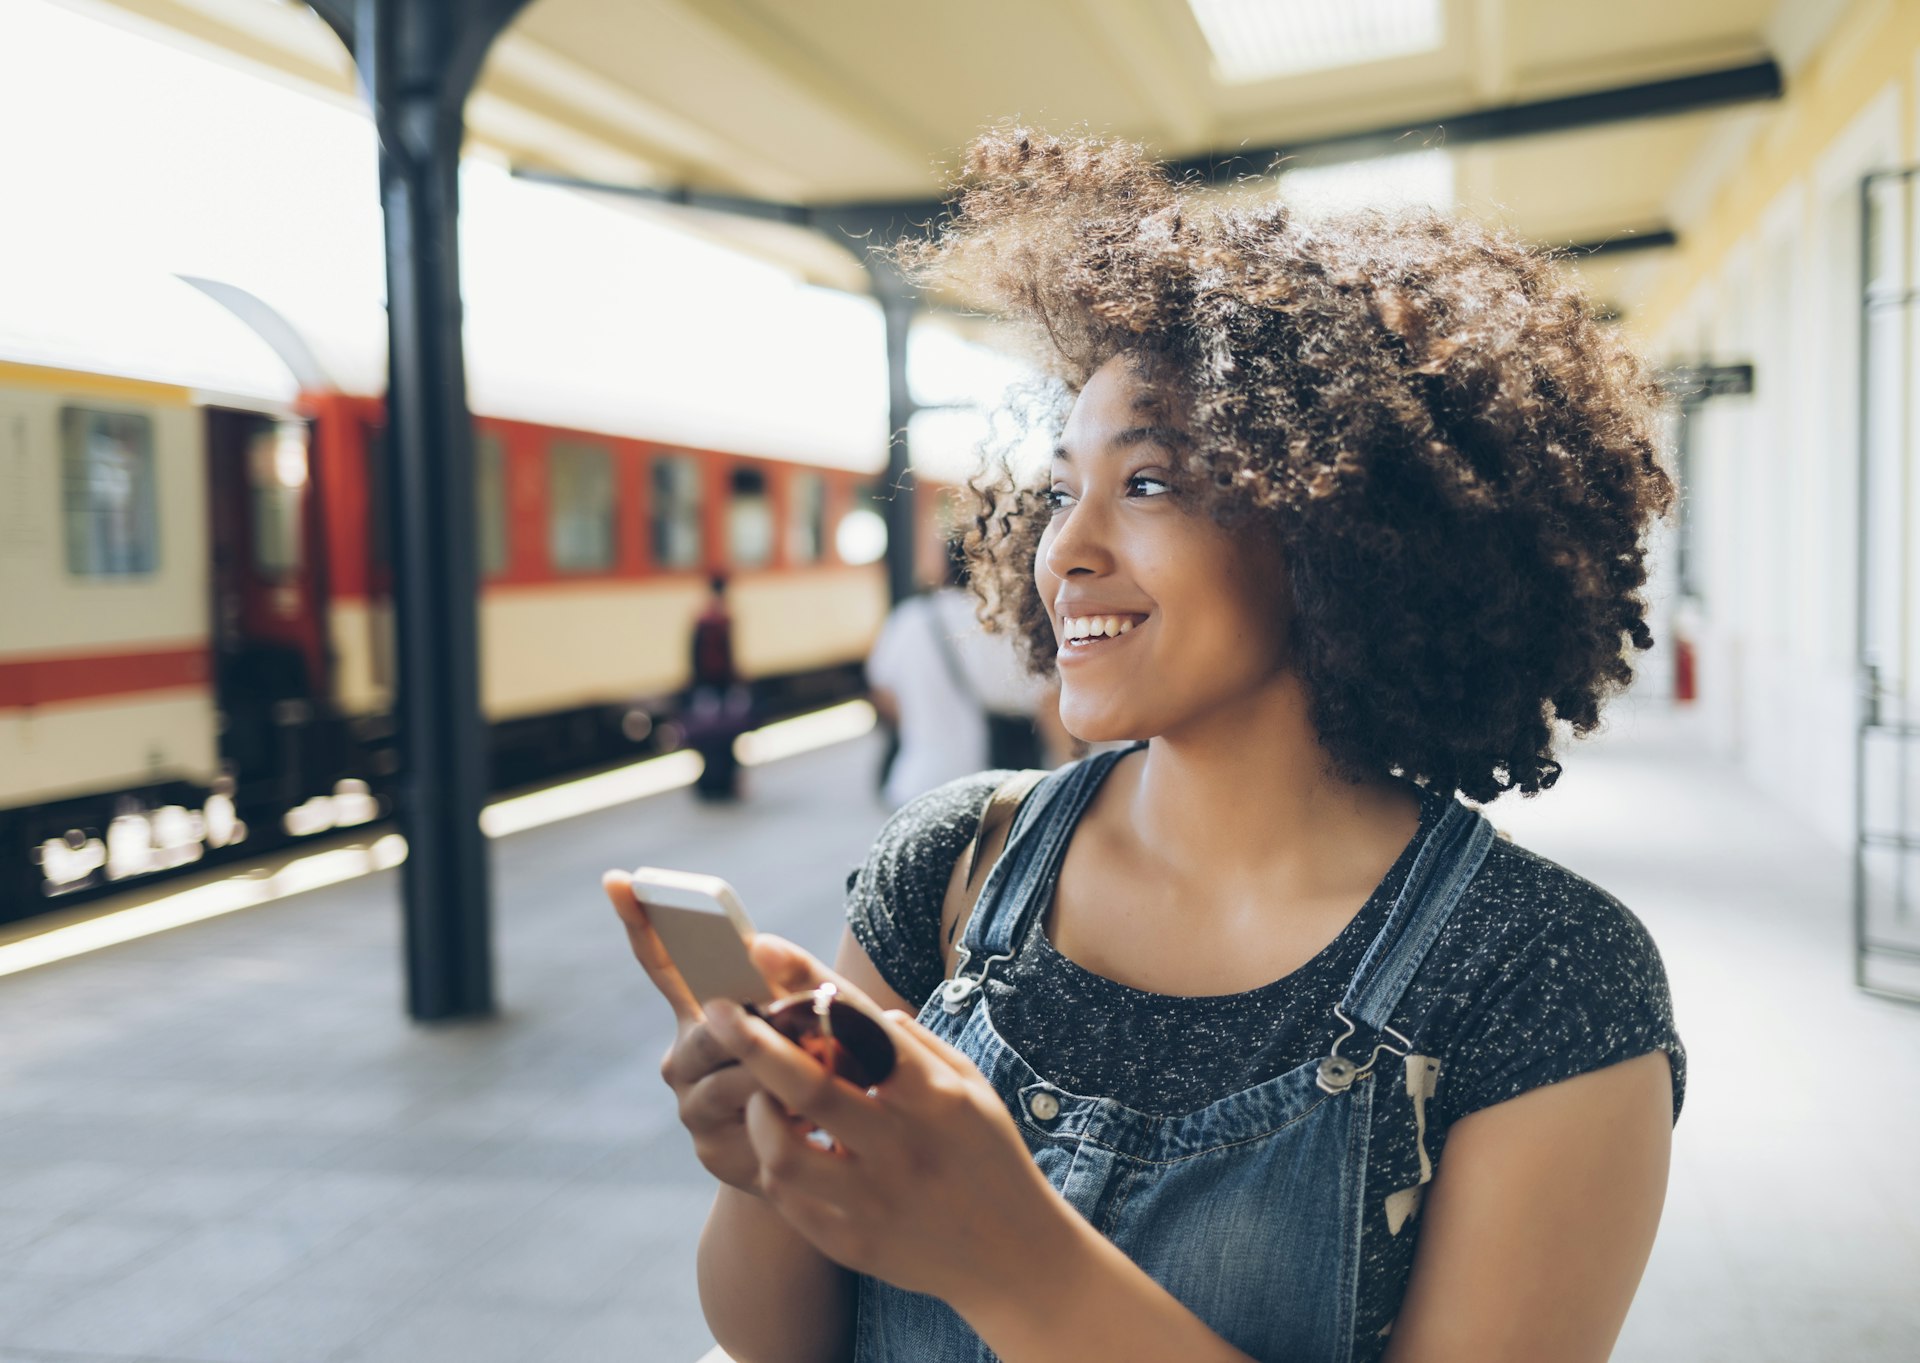 Smiling woman using smart phone on station